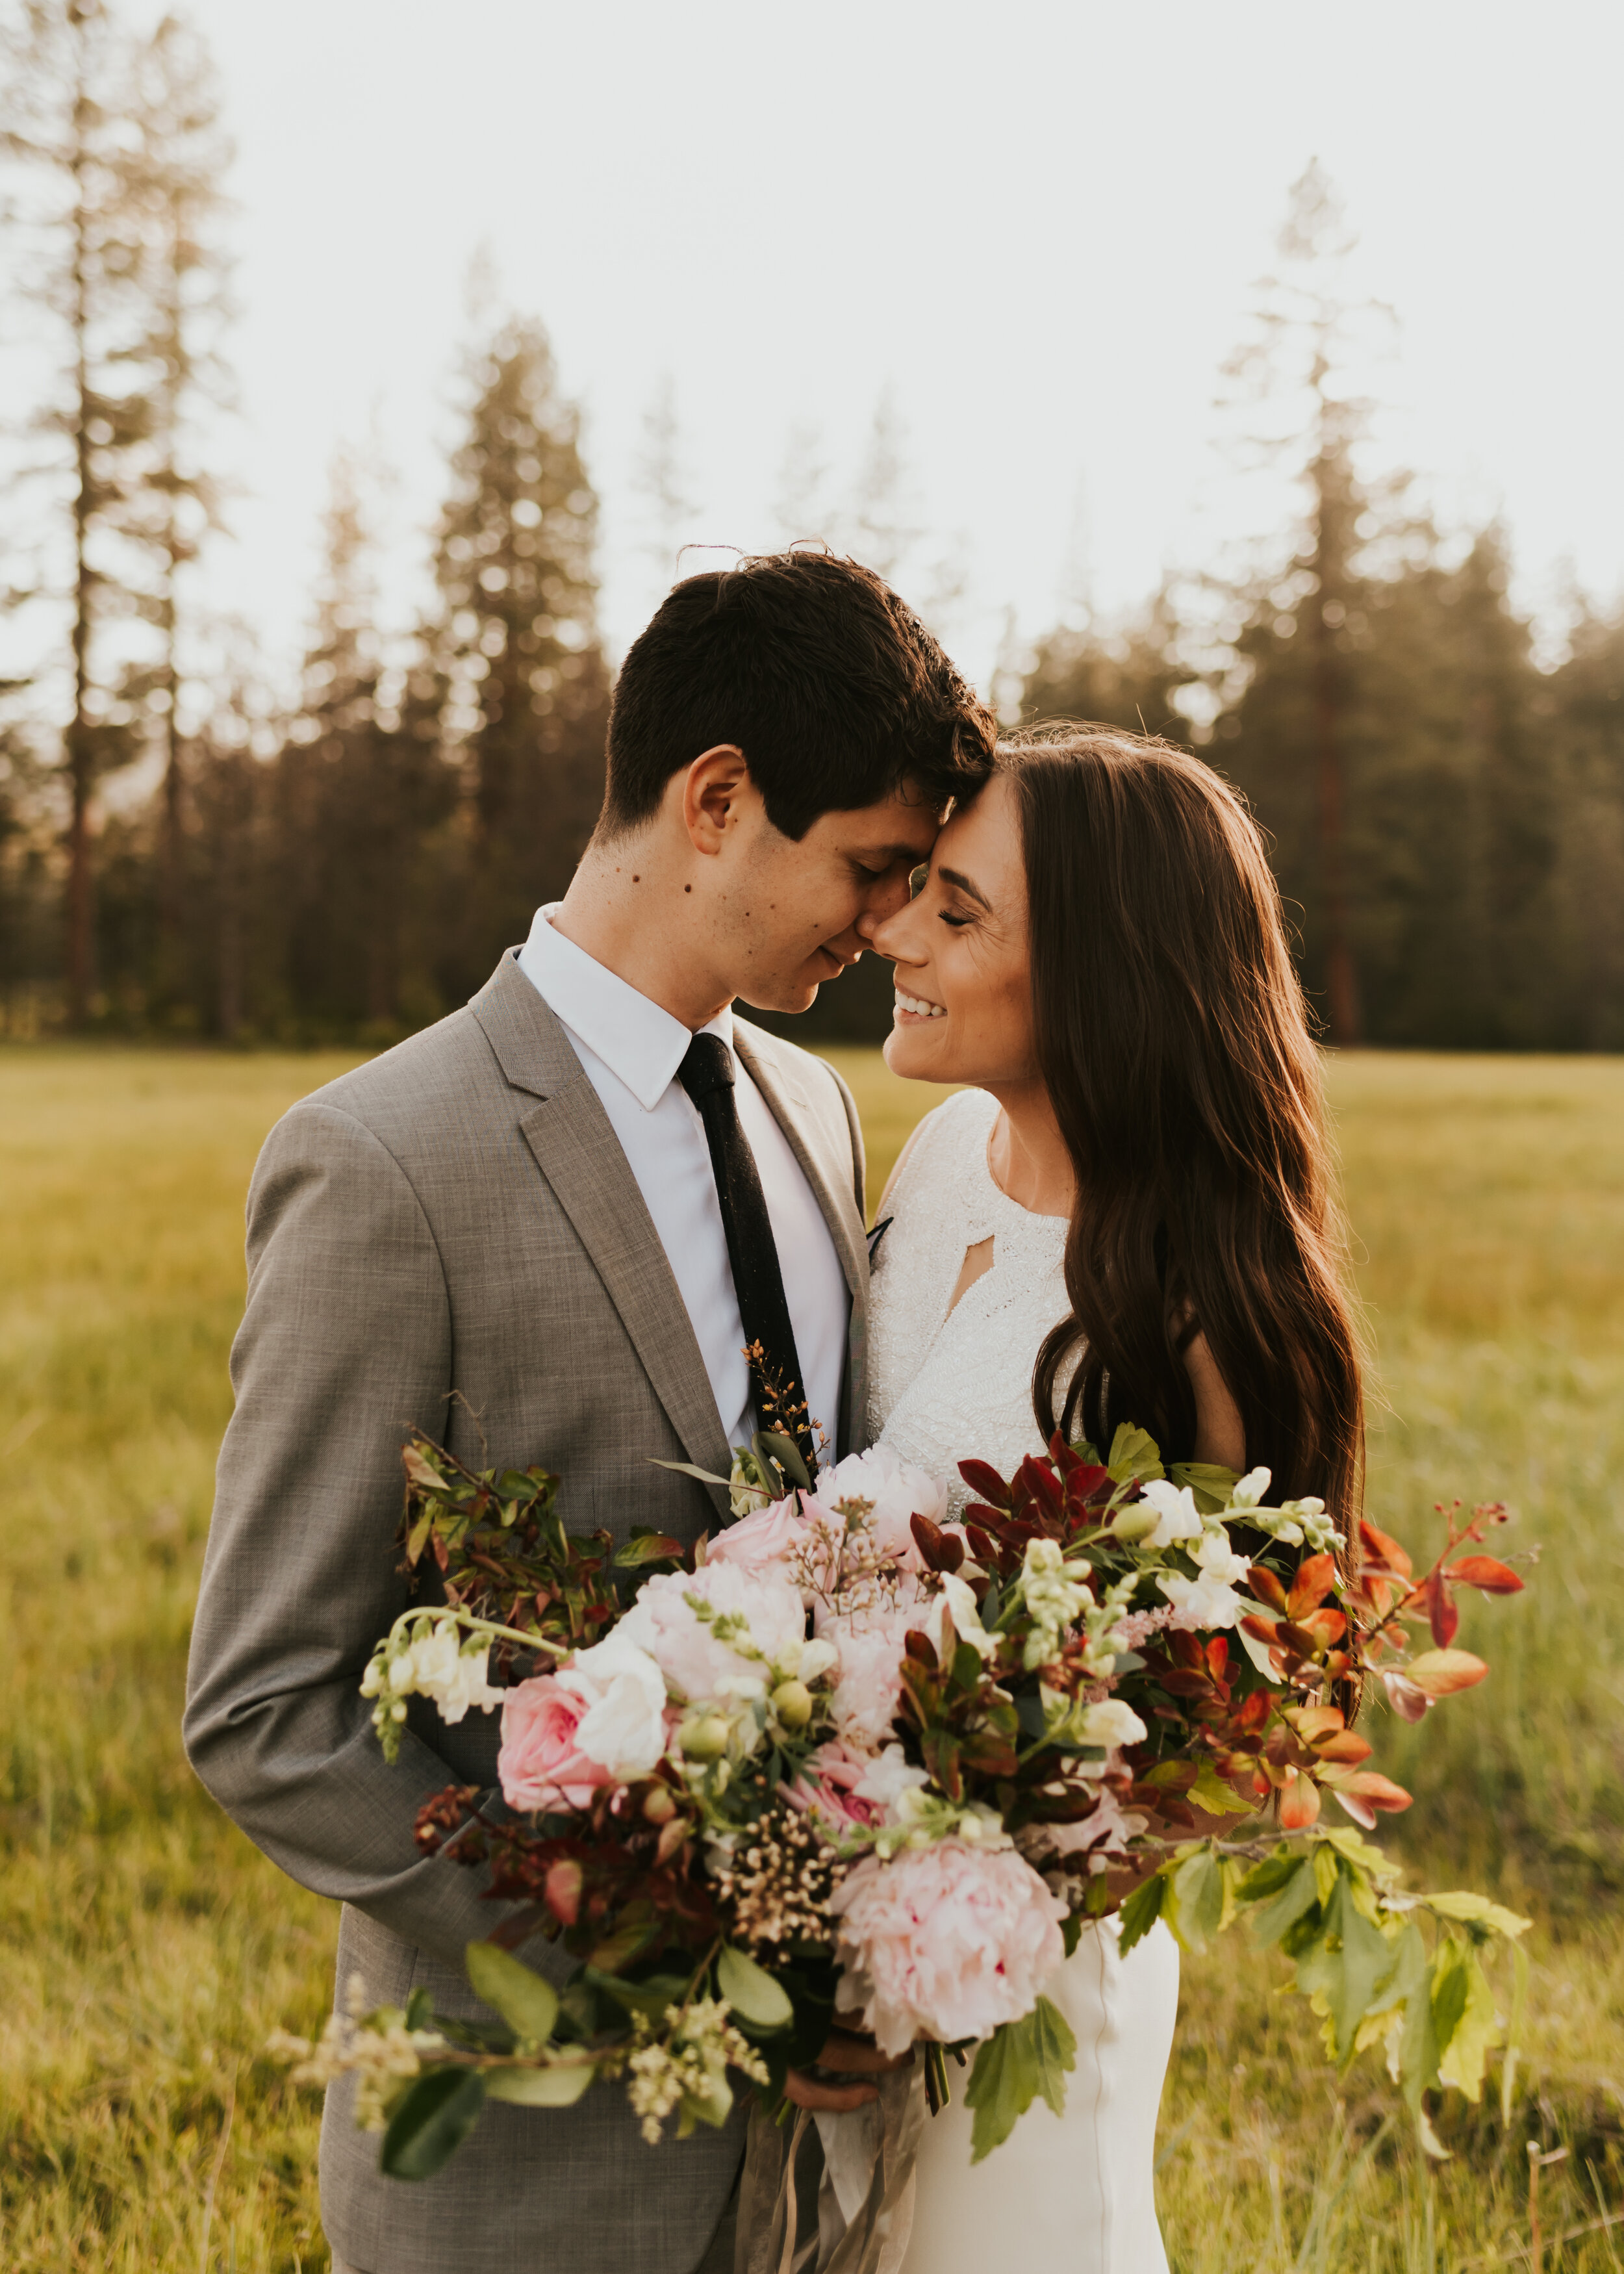 Sequoia National Park Elopement | California Elopement Photographer | Sequoia and Kings Canyon National Park | Adventure Elopement | National Park Wedding